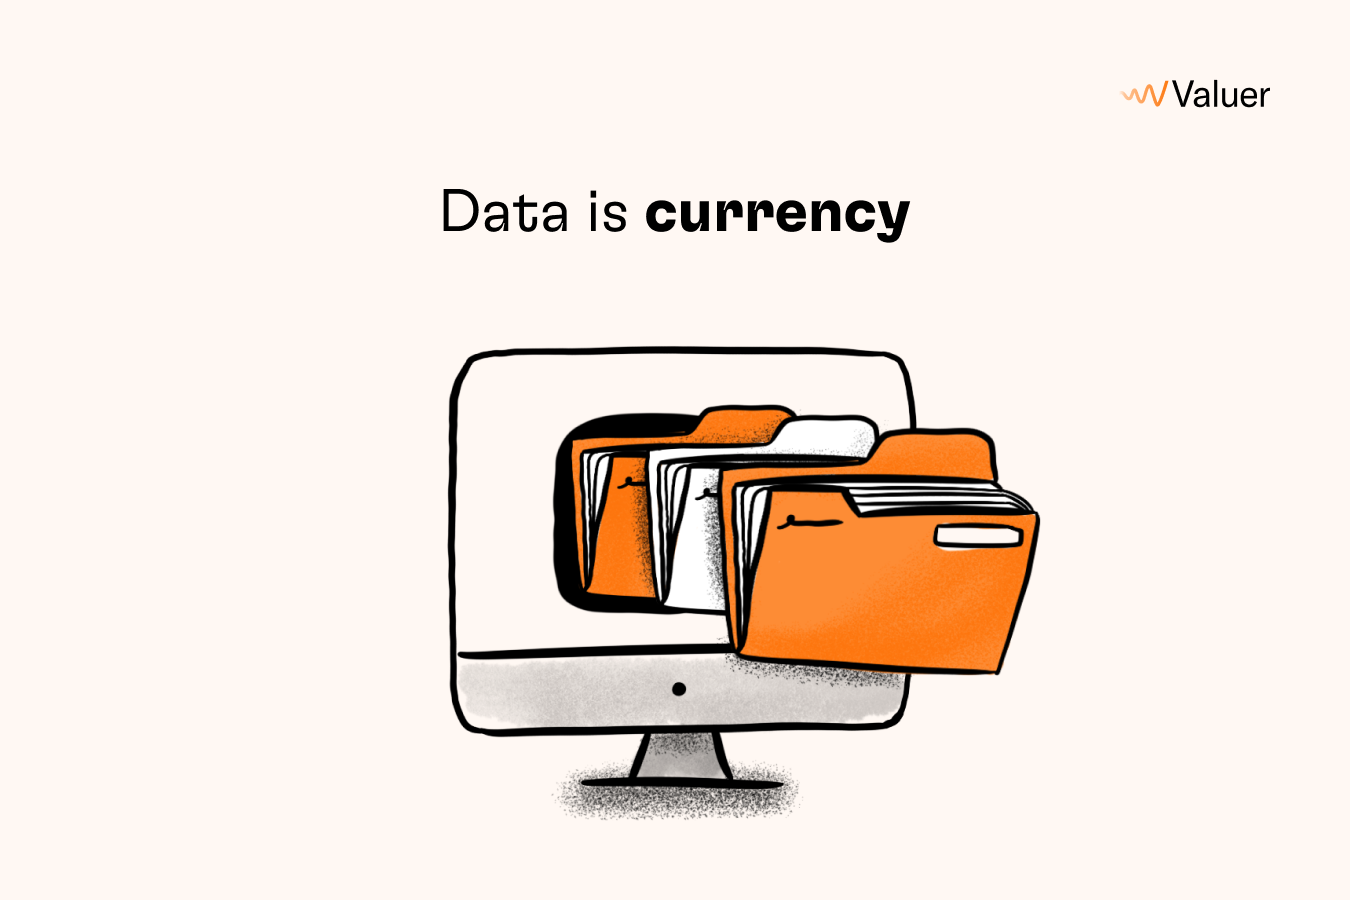 Data is currency